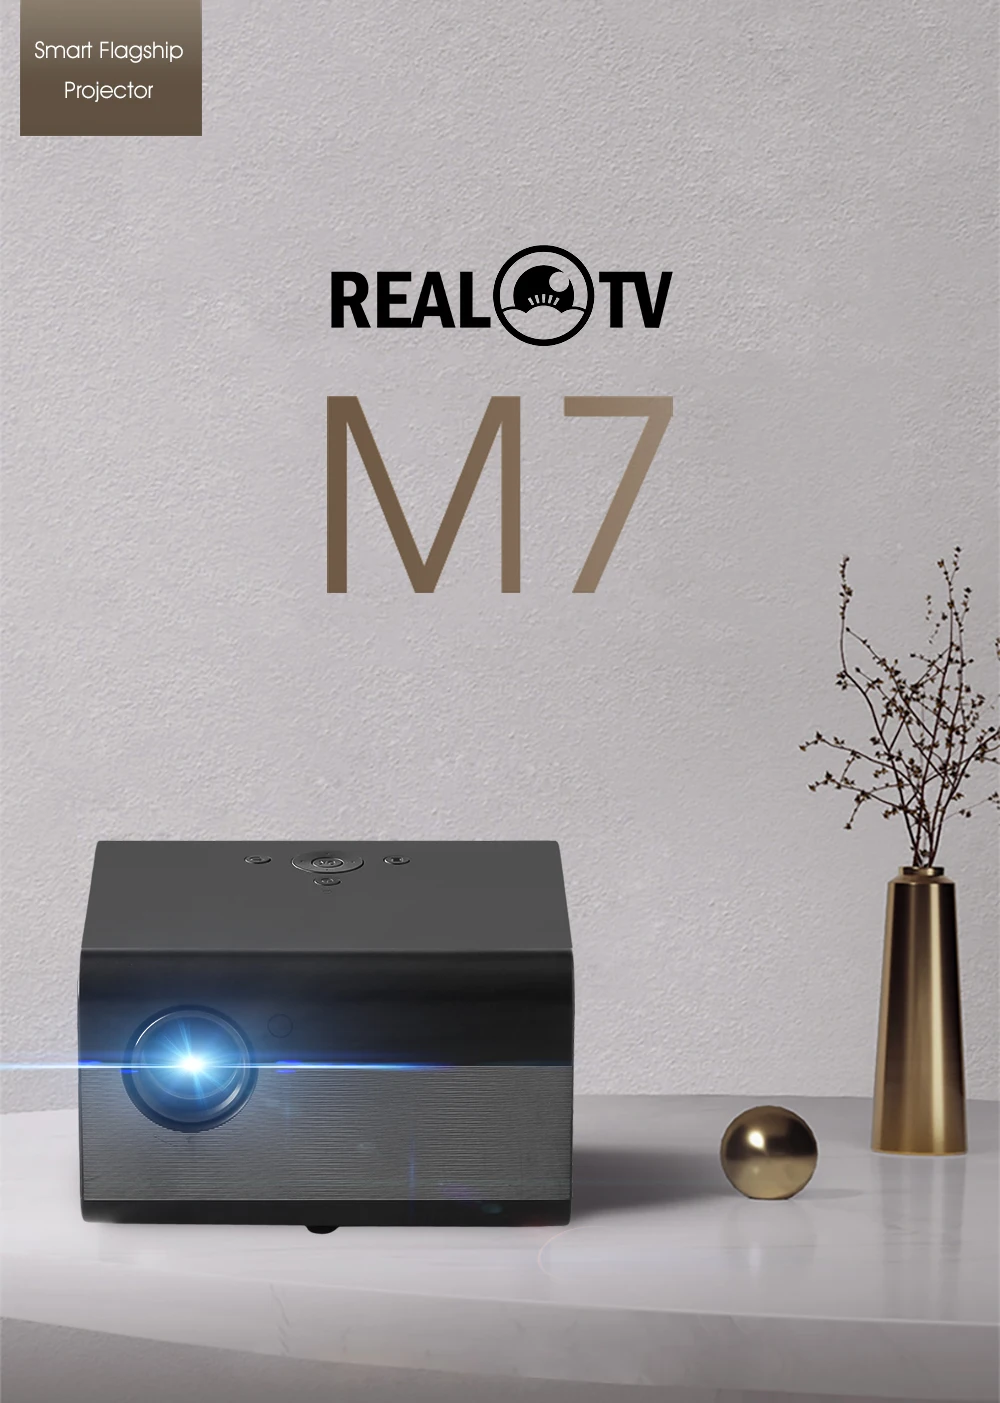 REAL TV M7 Mini Led Projector Support 4K 3D 5500 Lumens Android Wifi Bluetooth Portable Cinema Beamer For Smartphone